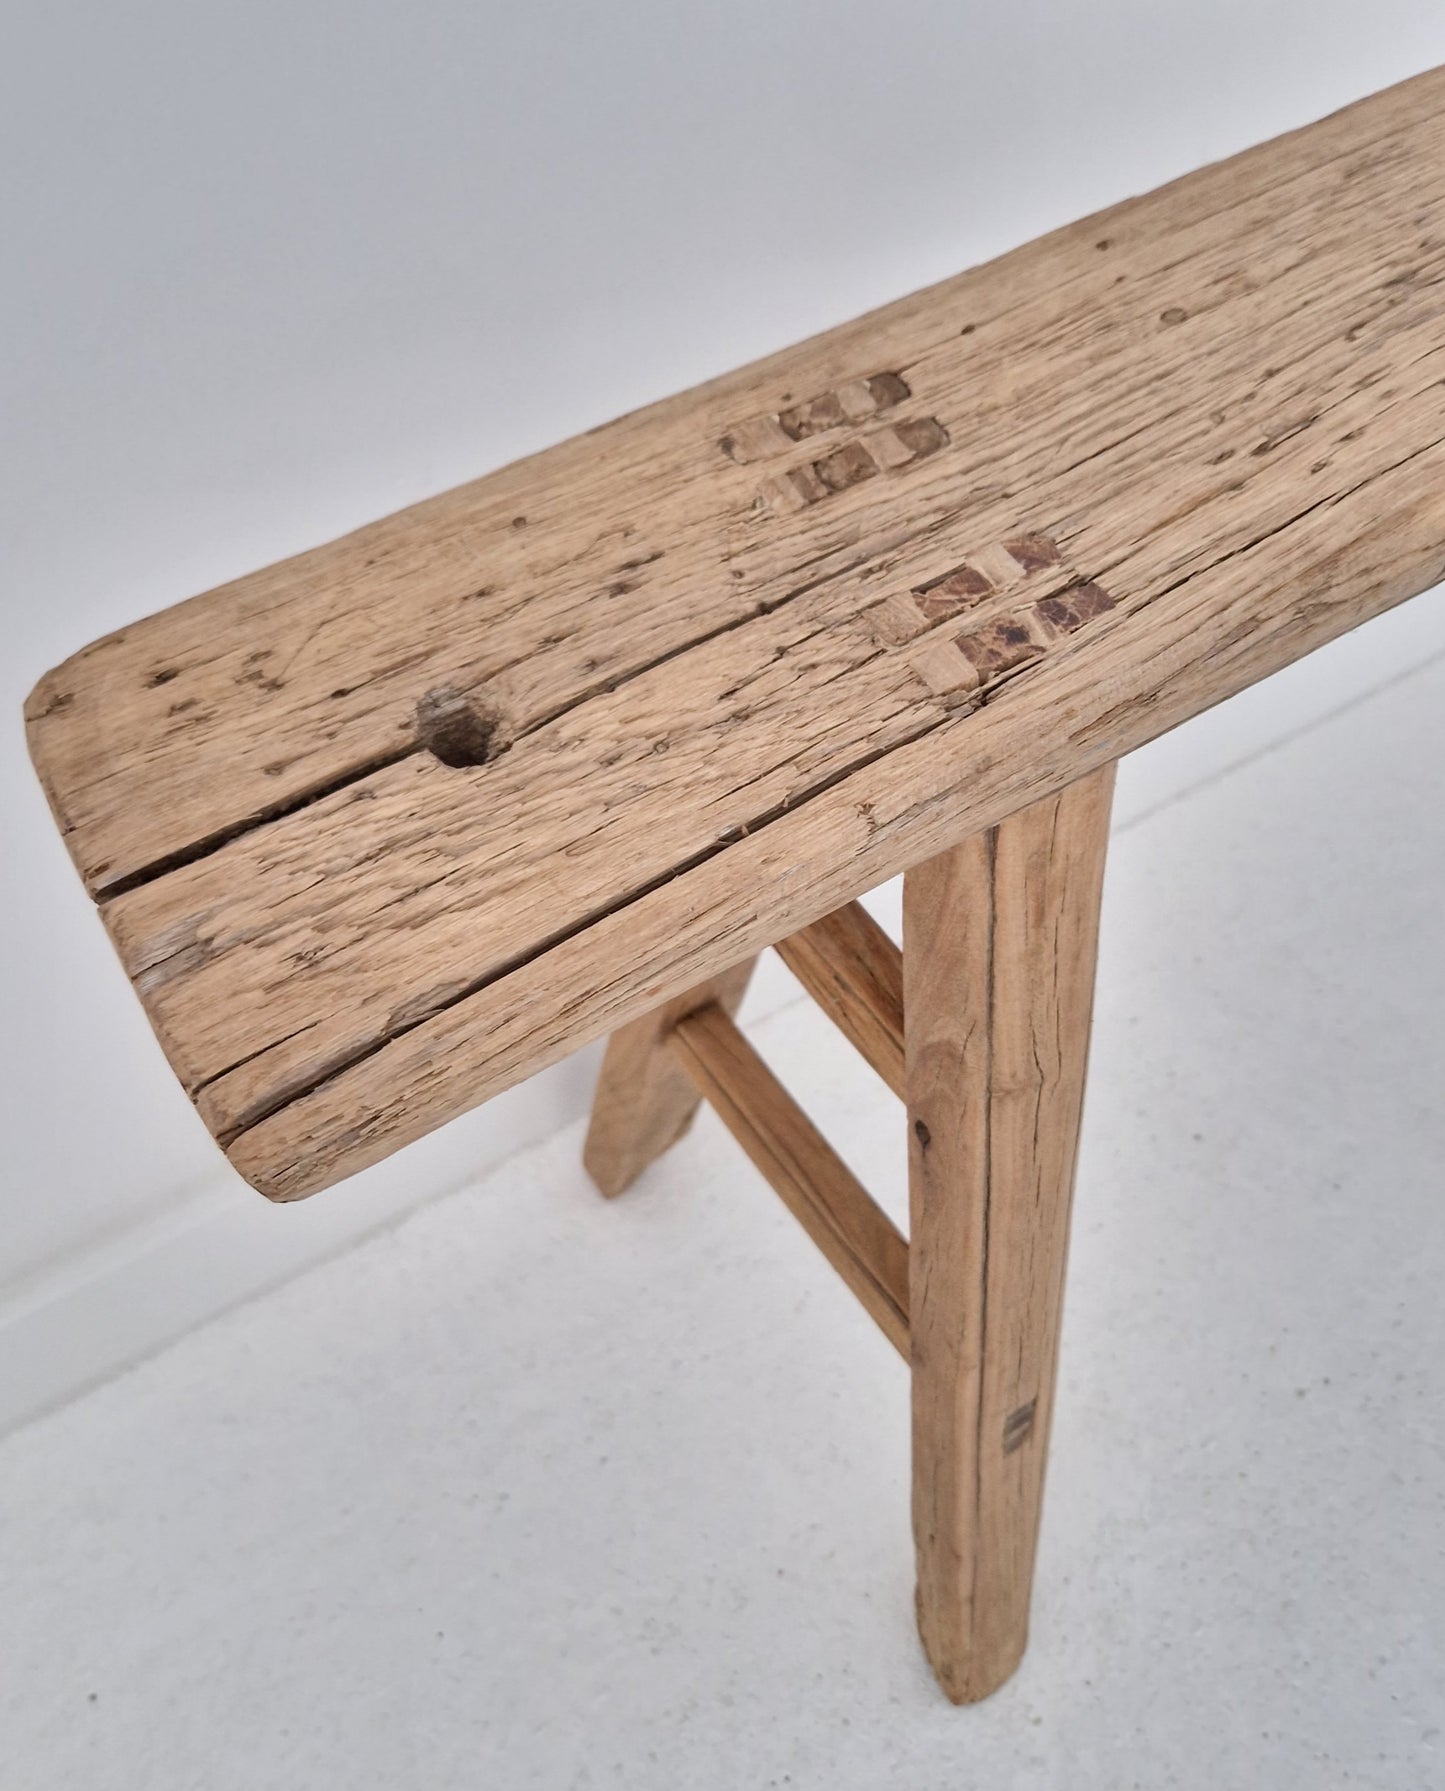 Old wooden bench #4 (112,5cm)